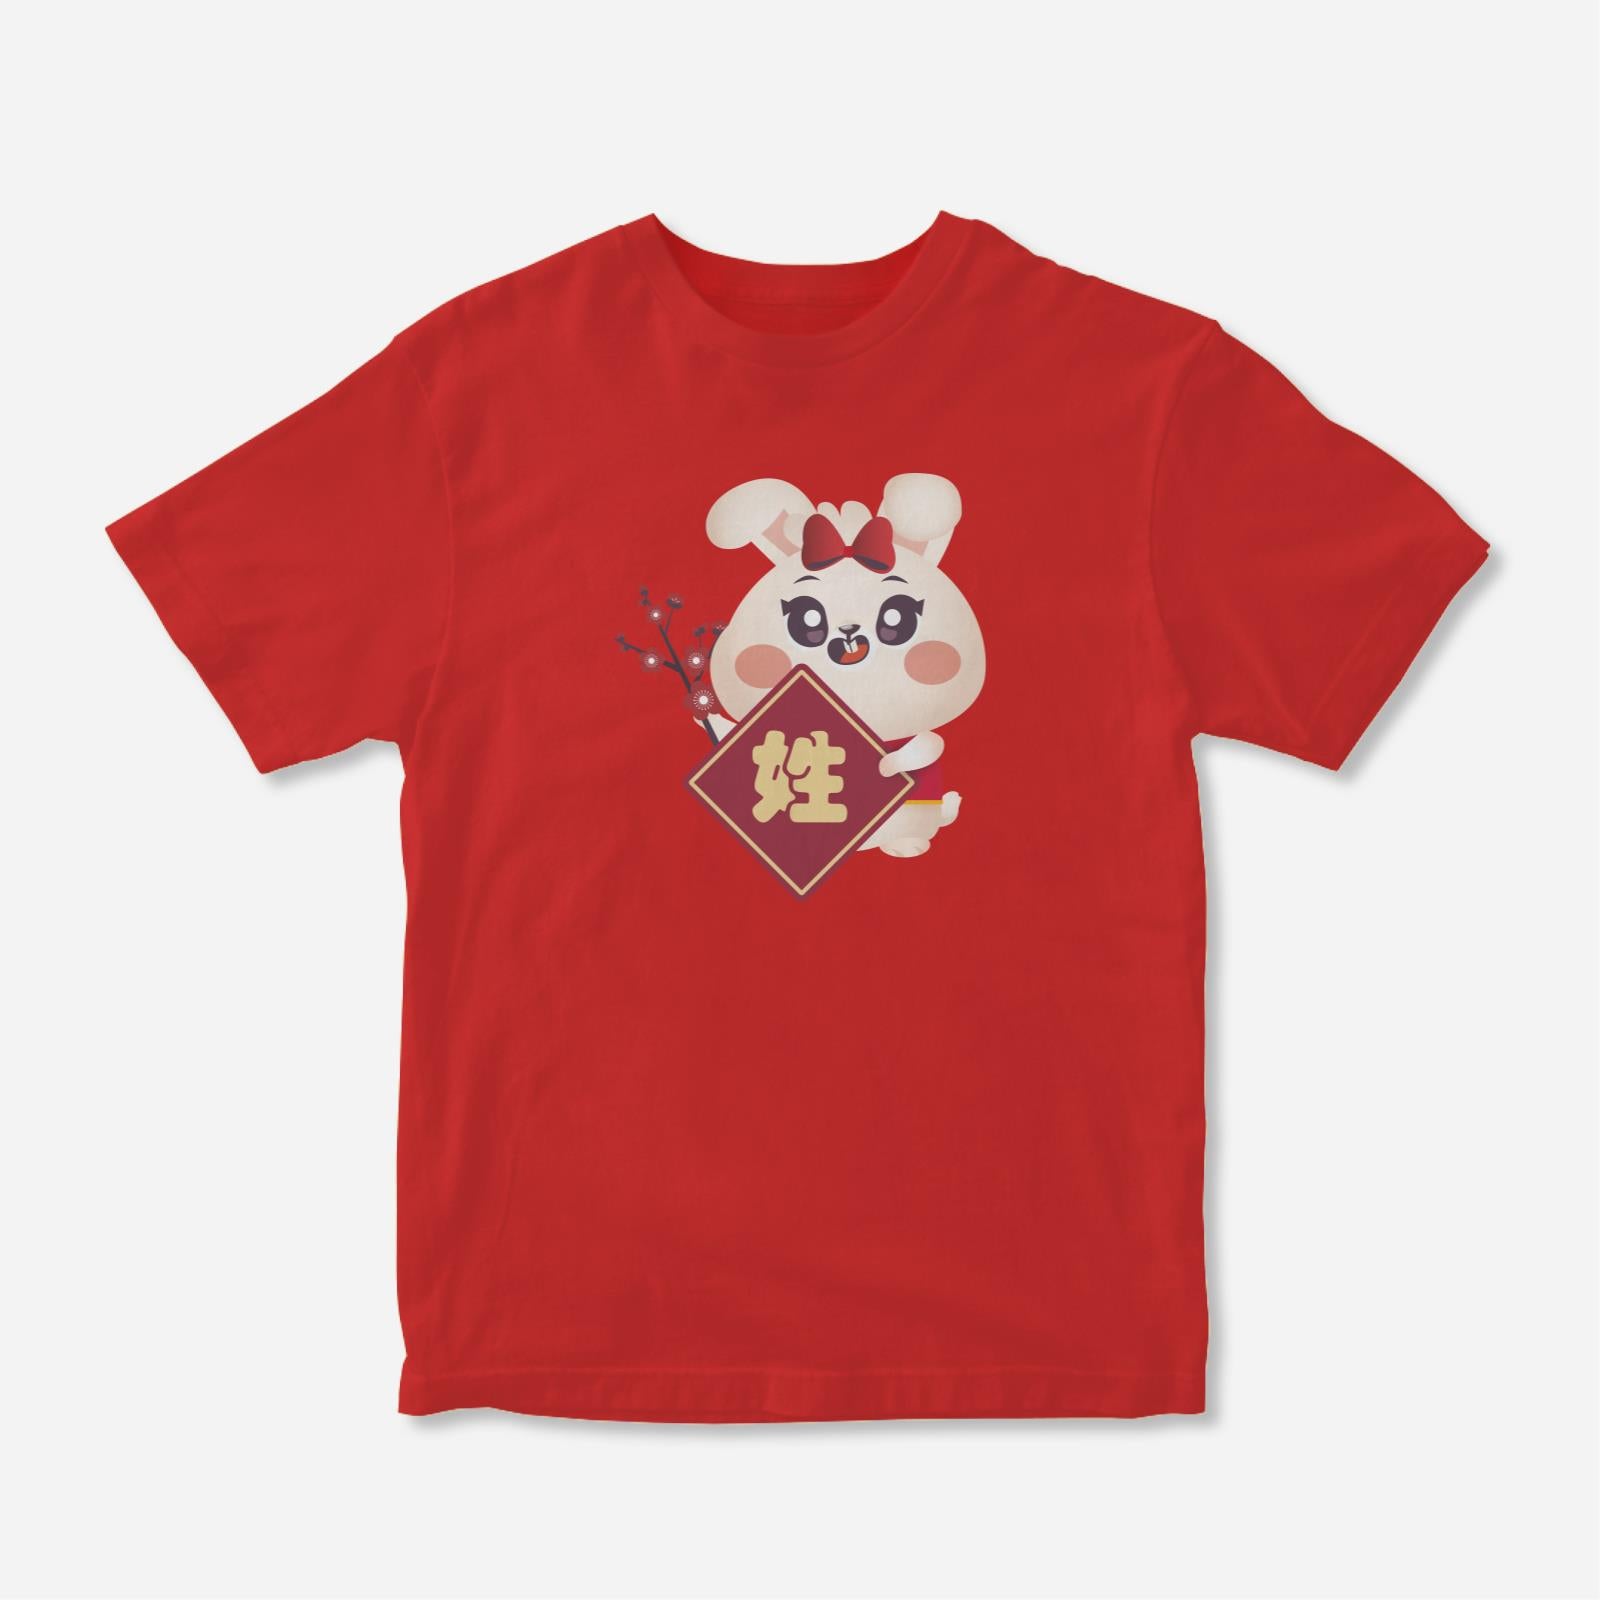 Cny Rabbit Family - Surname Sister Rabbit Kids Tee Shirt with Chinese Surname